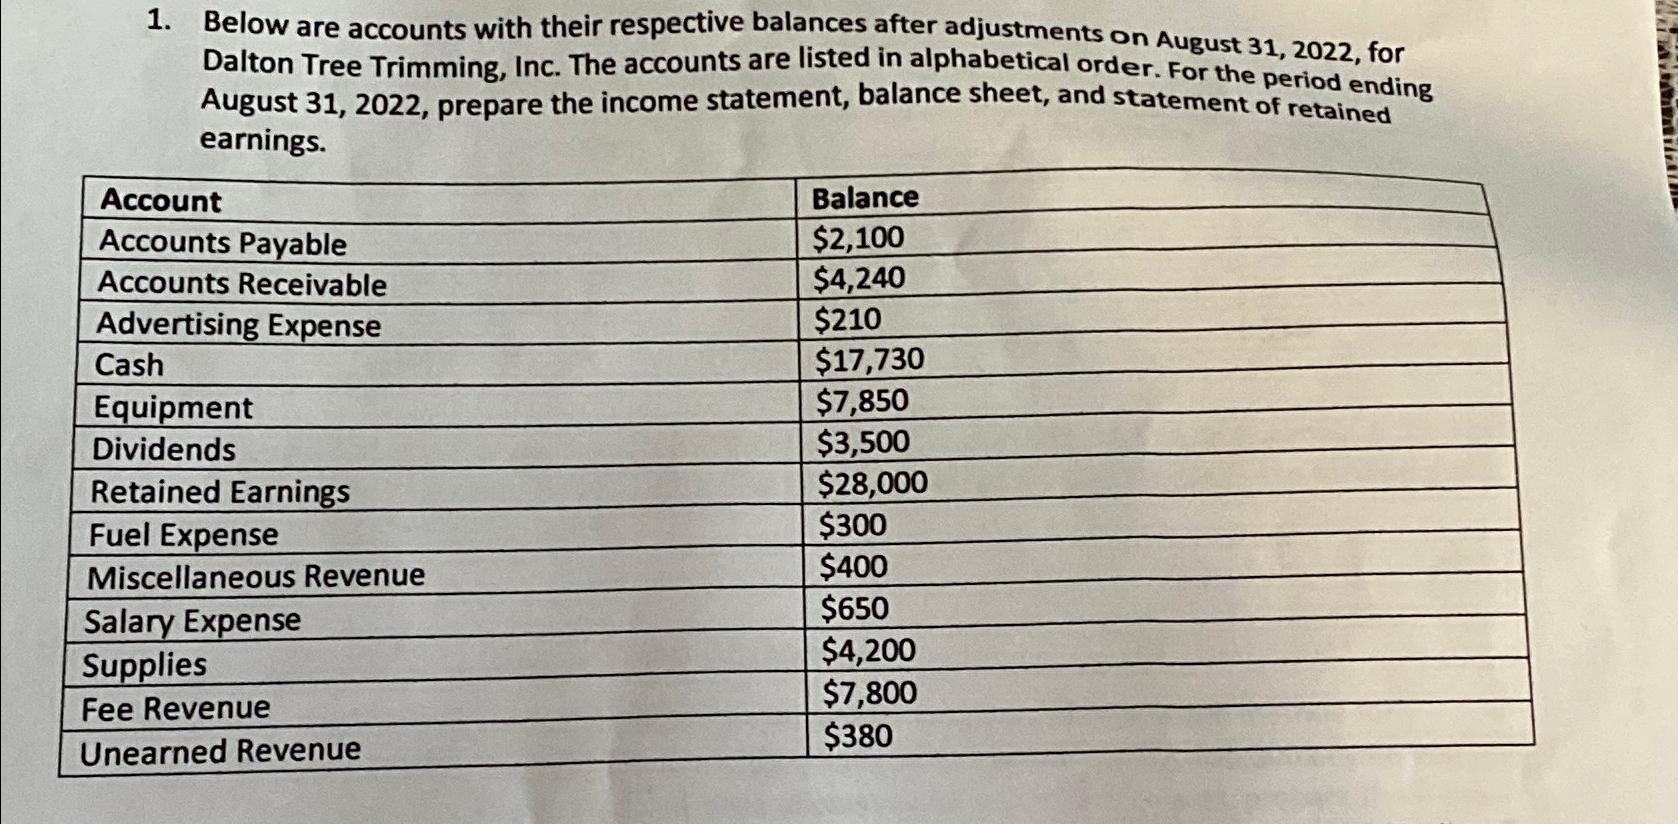 1. Below are accounts with their respective balances after adjustments on August 31, 2022, for Dalton Tree